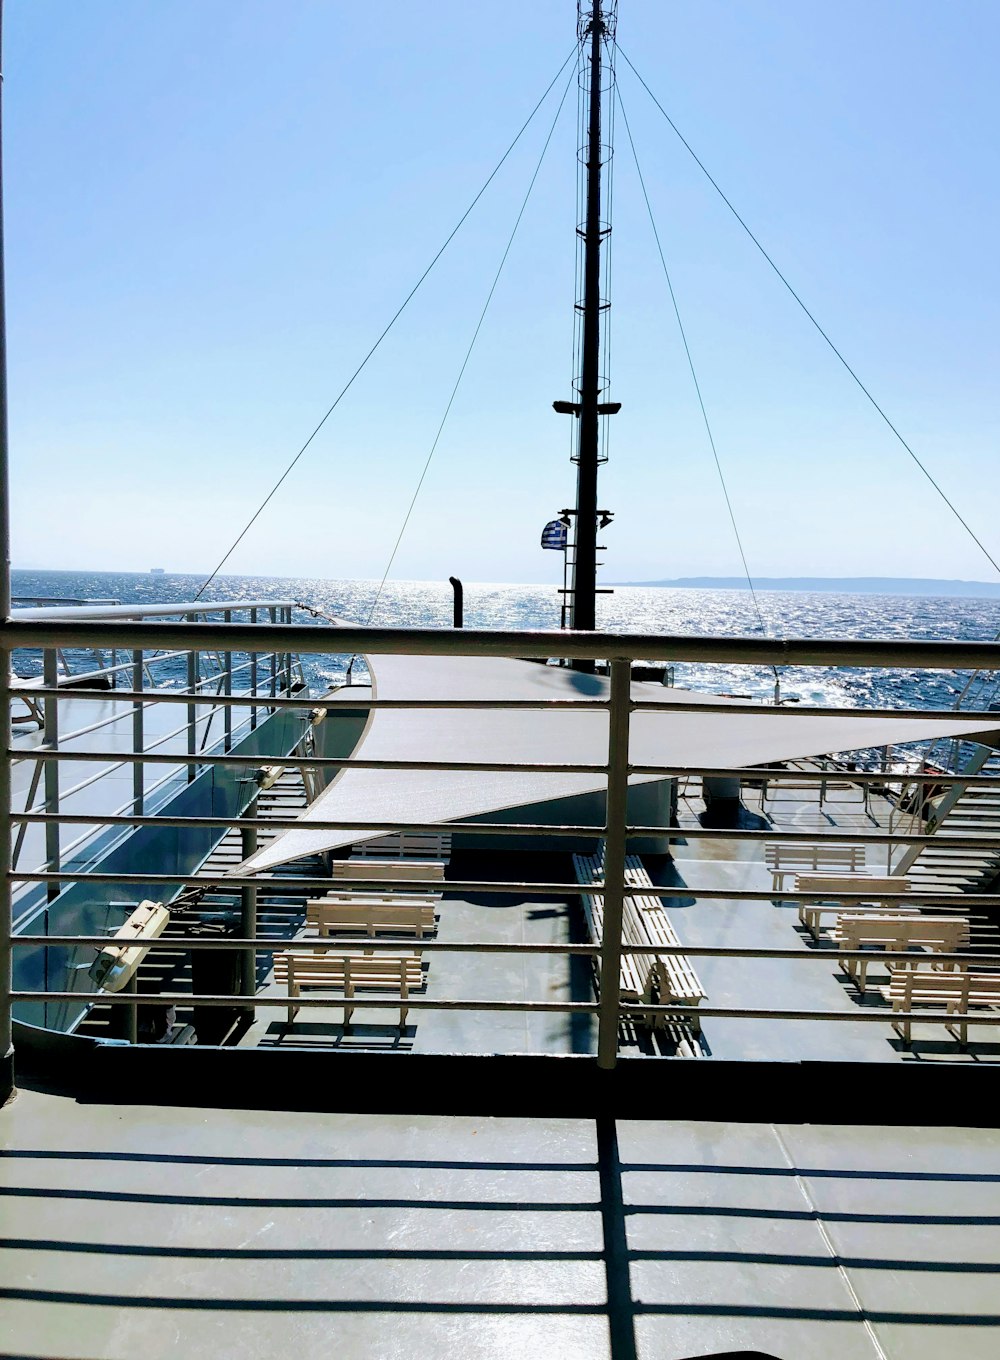 a view of the ocean from a deck of a ship